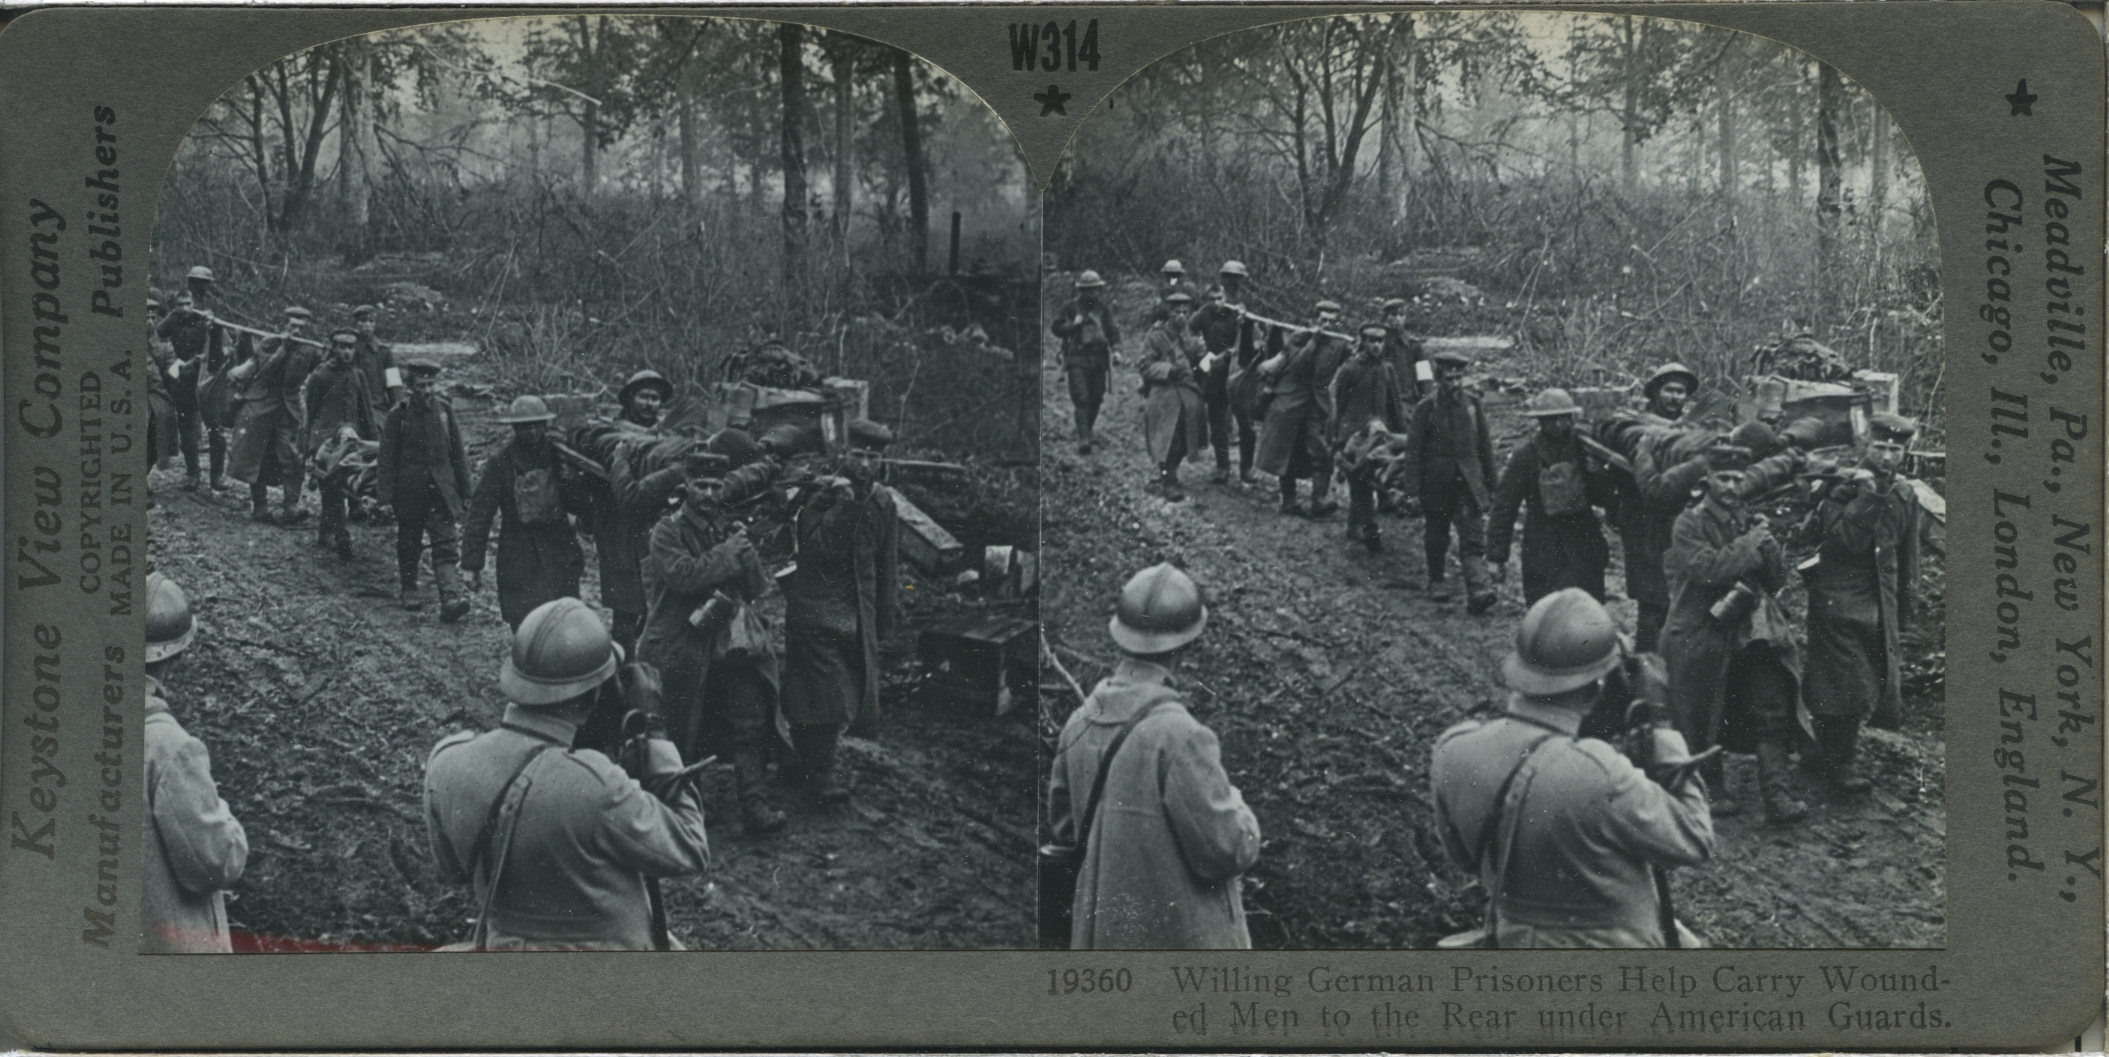 Willing German Prisoners Helping to Carry Wounded men to the Rear under American Guards